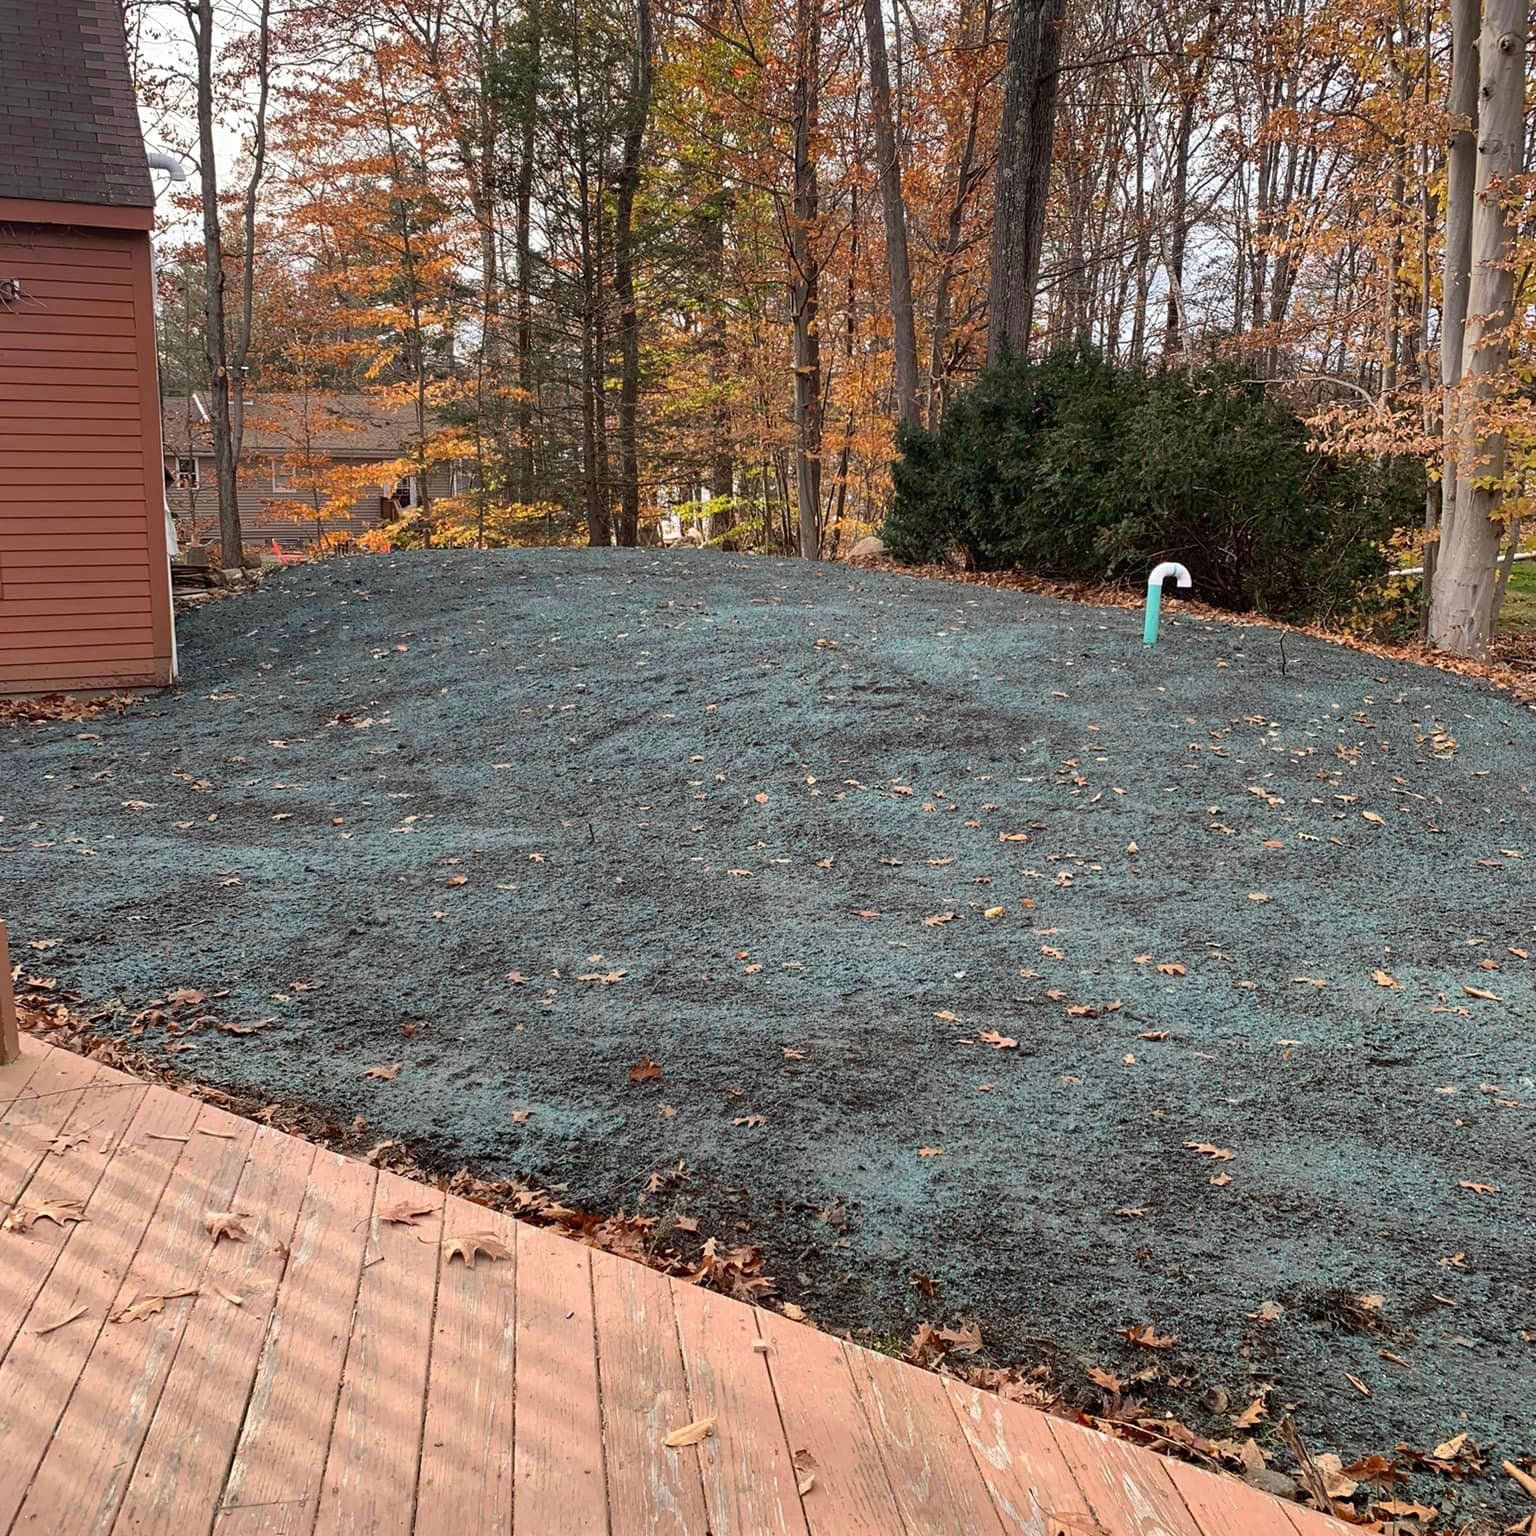 septic system raised above the rest of the ground